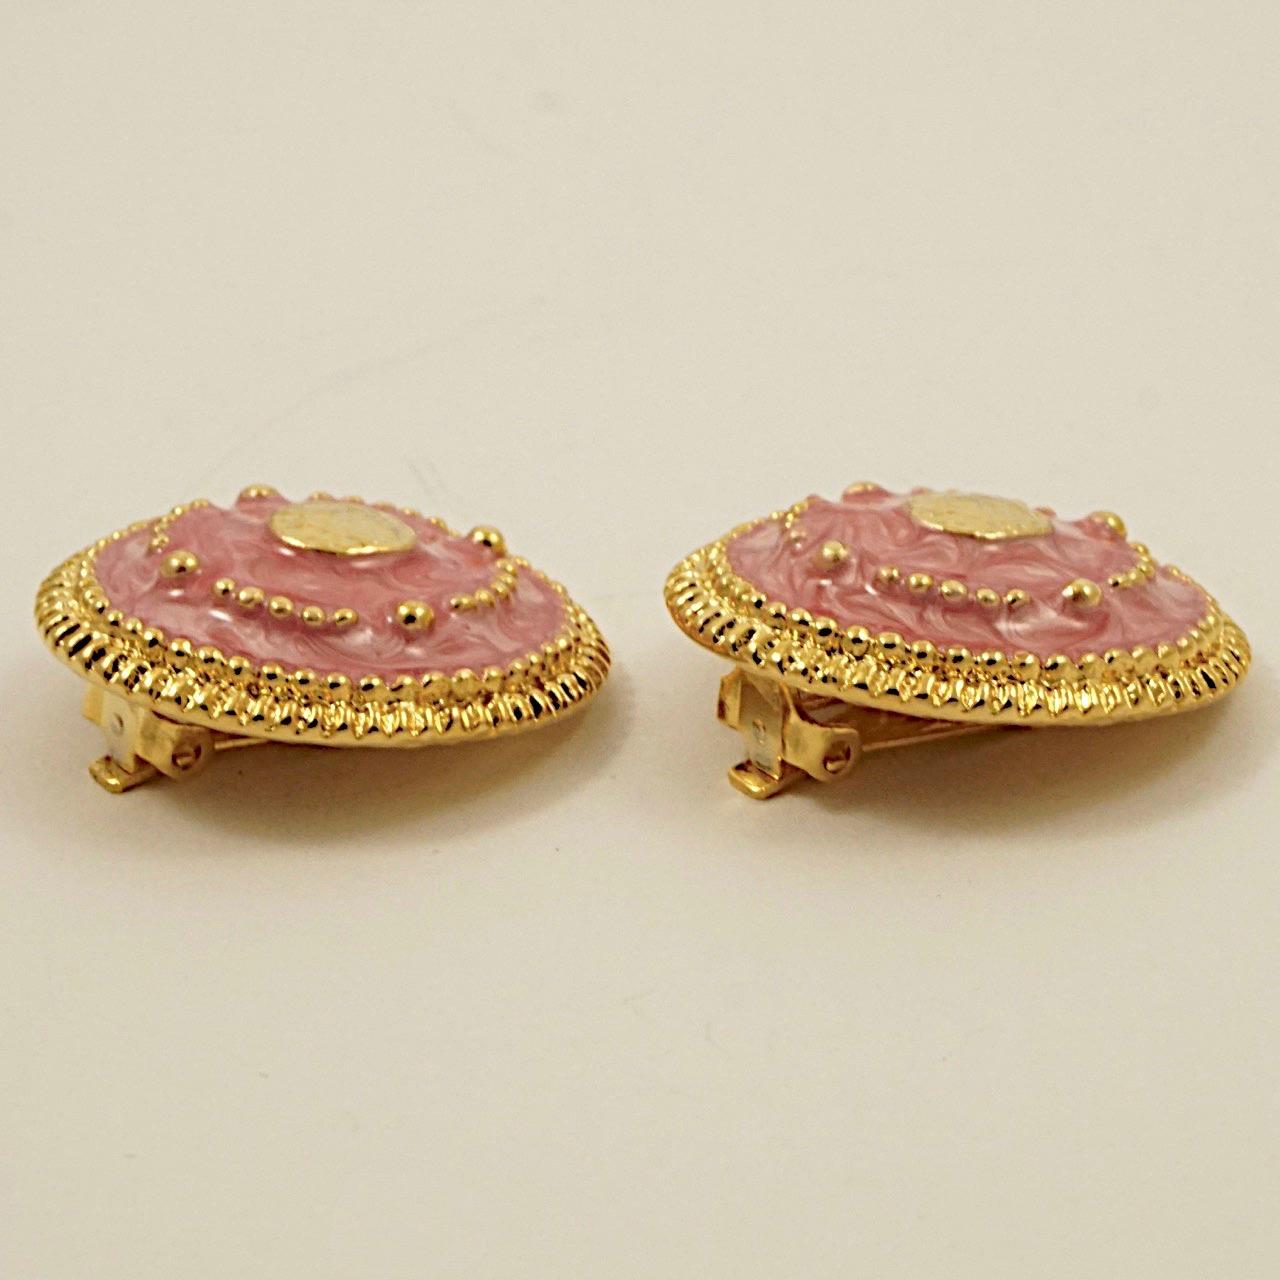 Gold plated clip on earrings, decorated with pink enamel and gold domes. They are in very good condition, as new. Measuring diameter 3.1 cm / 1.2 inches.

This beautiful pair of earrings is from the 1980s.